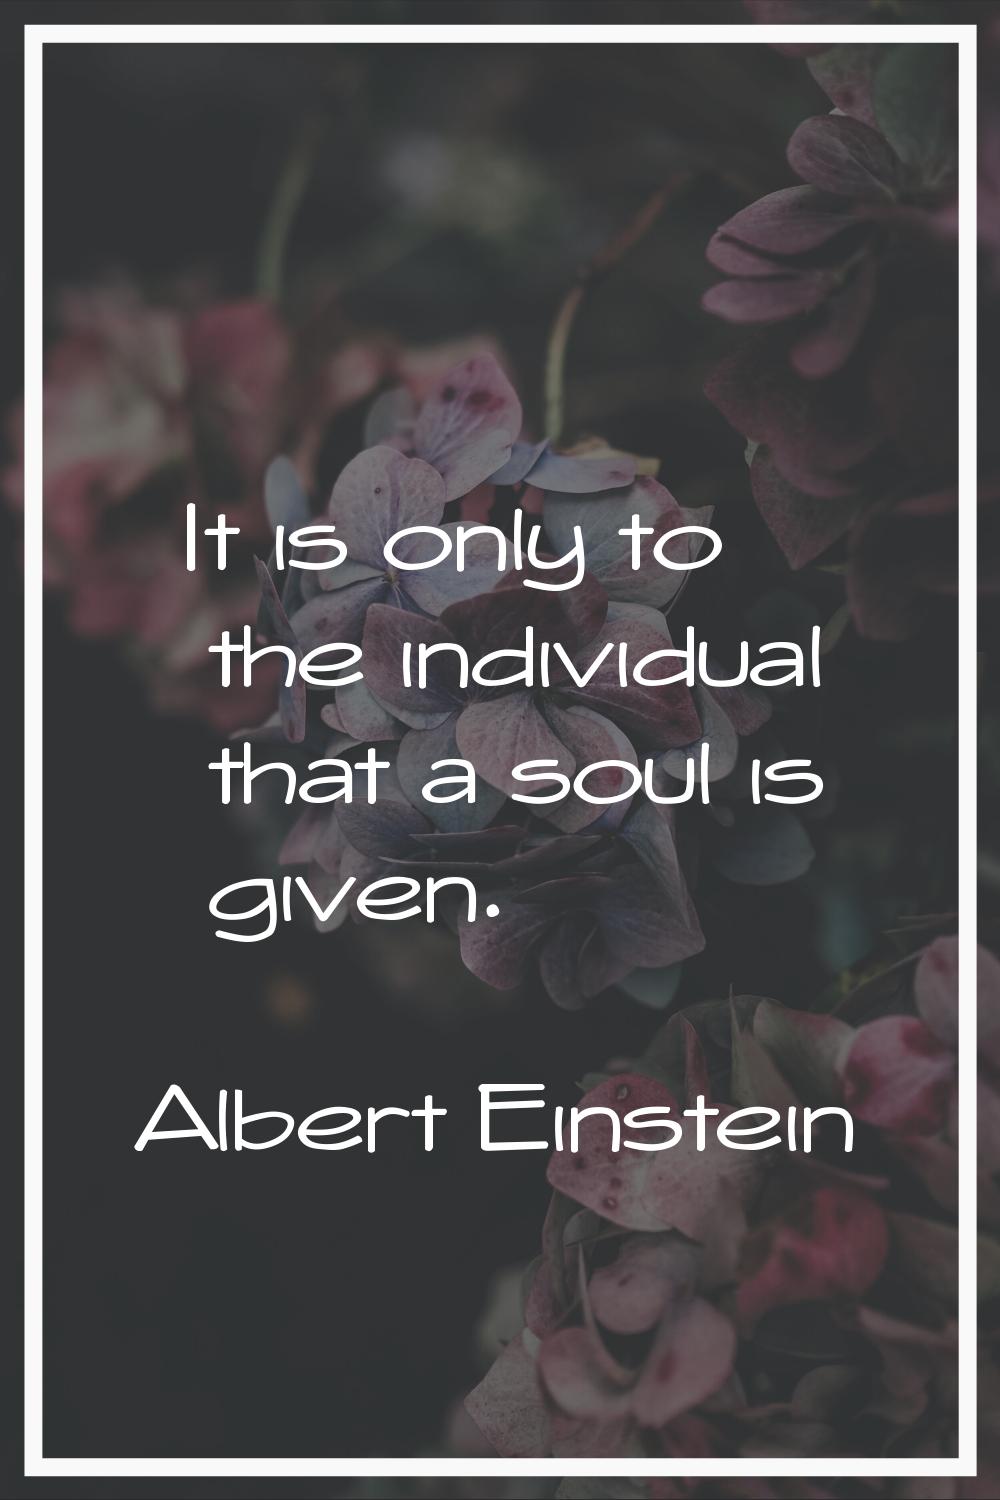 It is only to the individual that a soul is given.